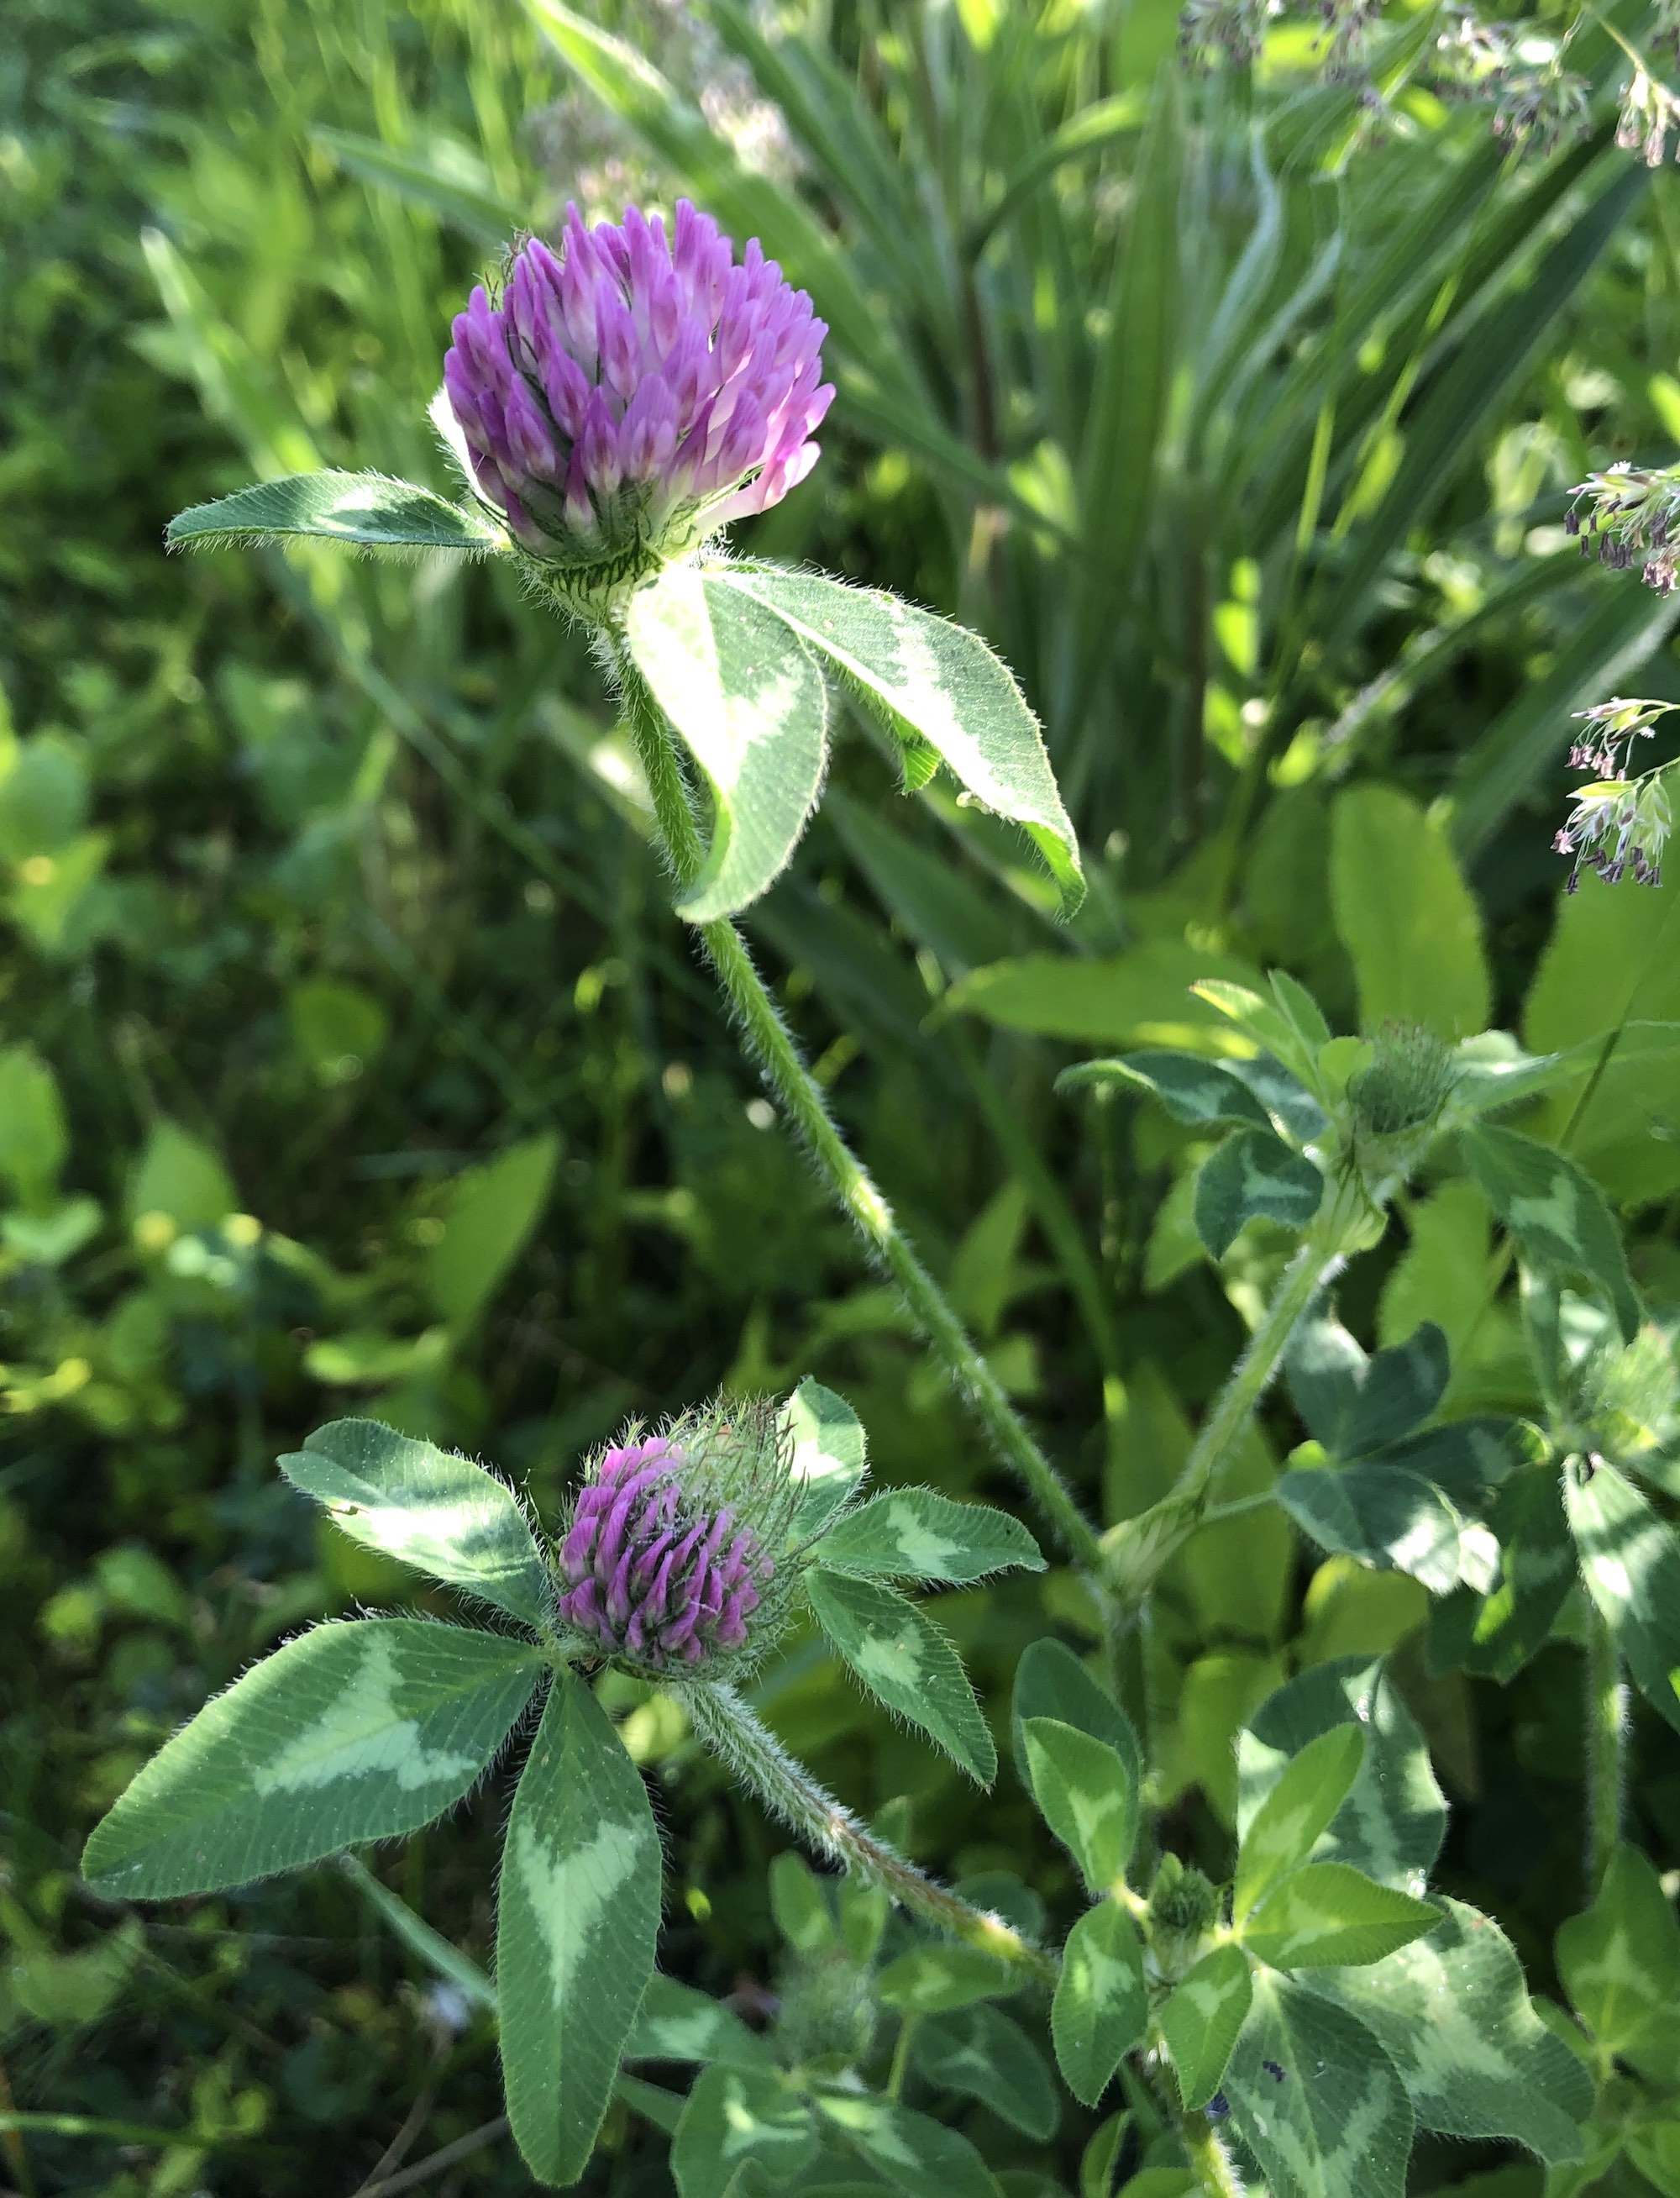 Red Clover on bank of retaining pond at the corner of Manitou Way and Nakoma Road in Madison, Wisconsin on June 6, 2019.